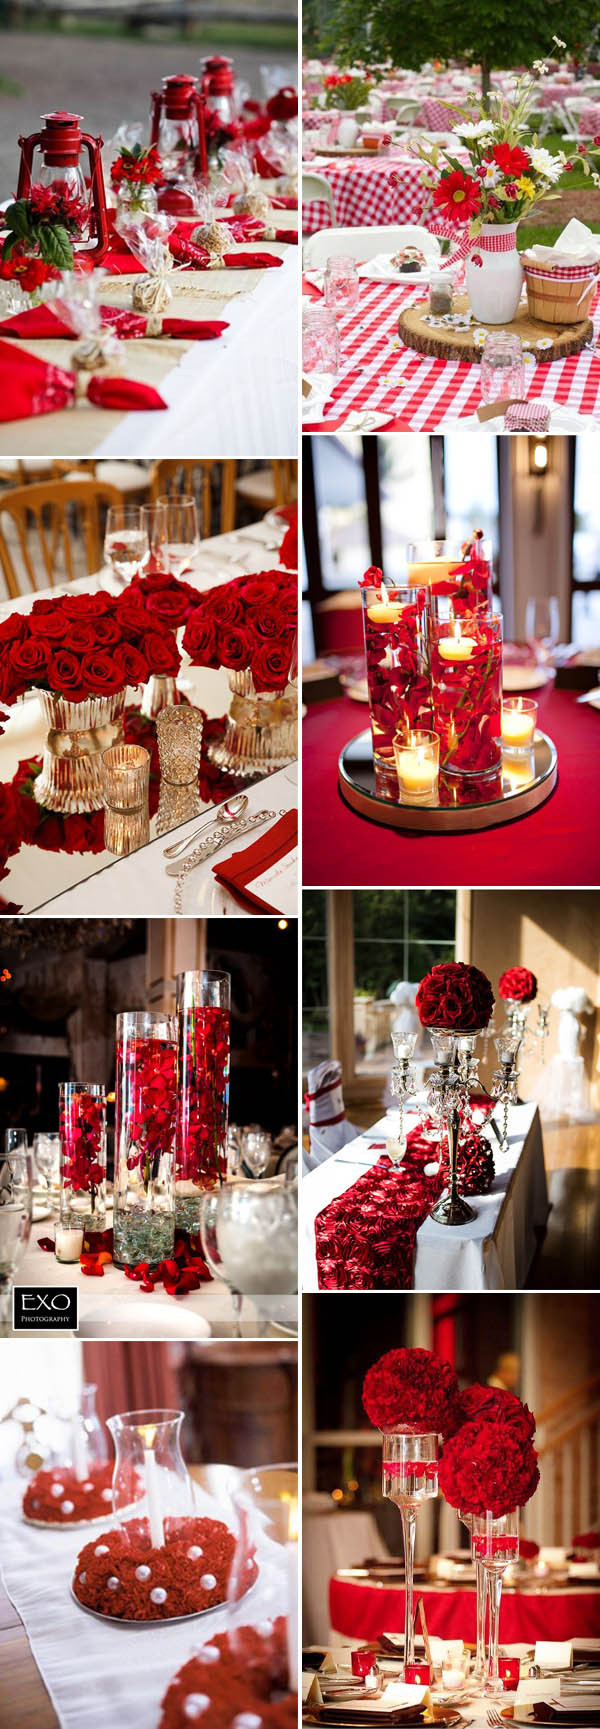 Red And White Wedding Decorations
 40 Inspirational Classic Red And White Wedding Ideas